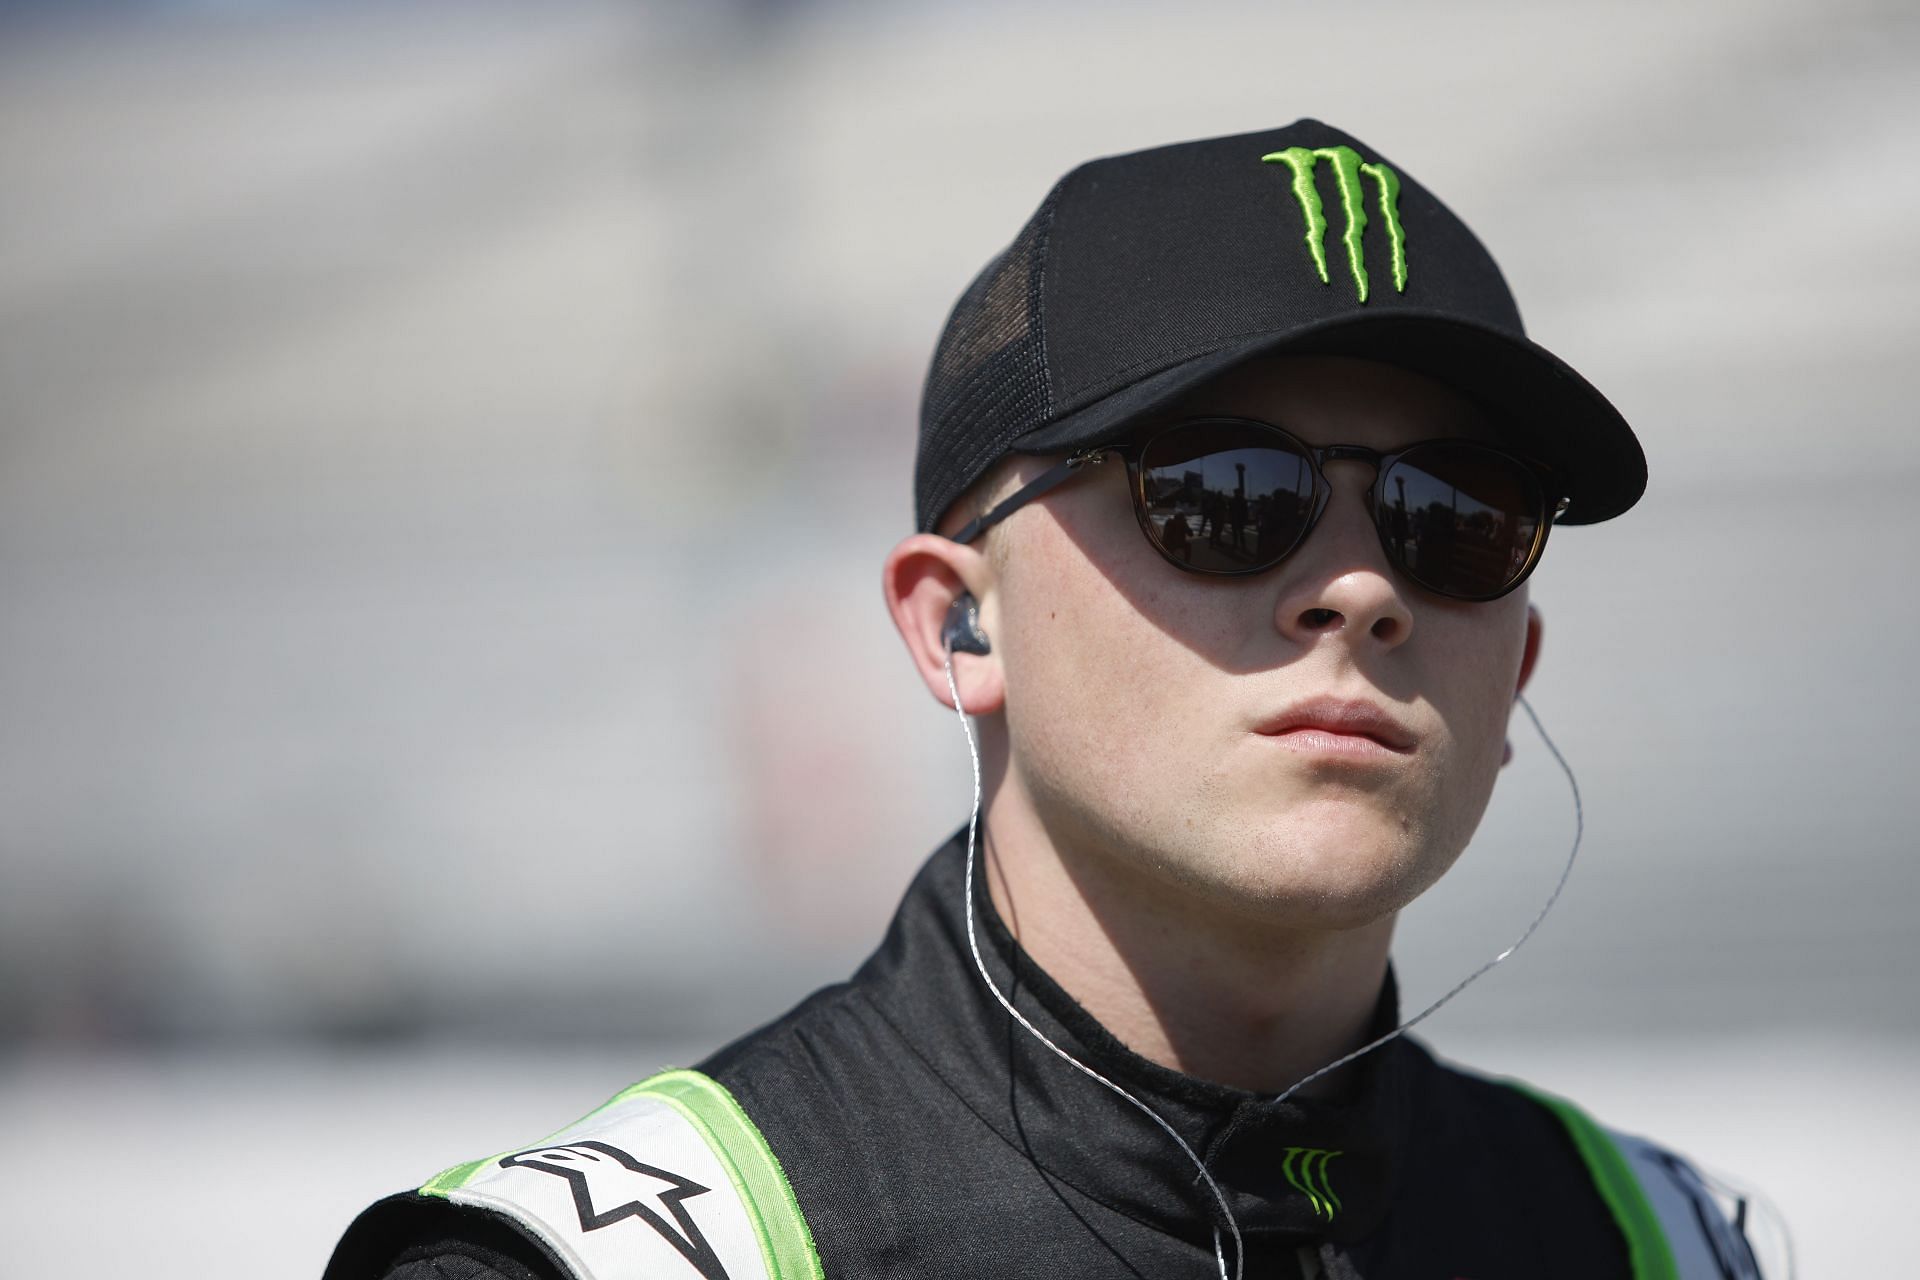 Ty Gibbs looks on during qualifying for the 2022 NASCAR Xfinity Series A-GAME 200 at Dover Motor Speedway in Dover, Delaware. (Photo by Sean Gardner/Getty Images)